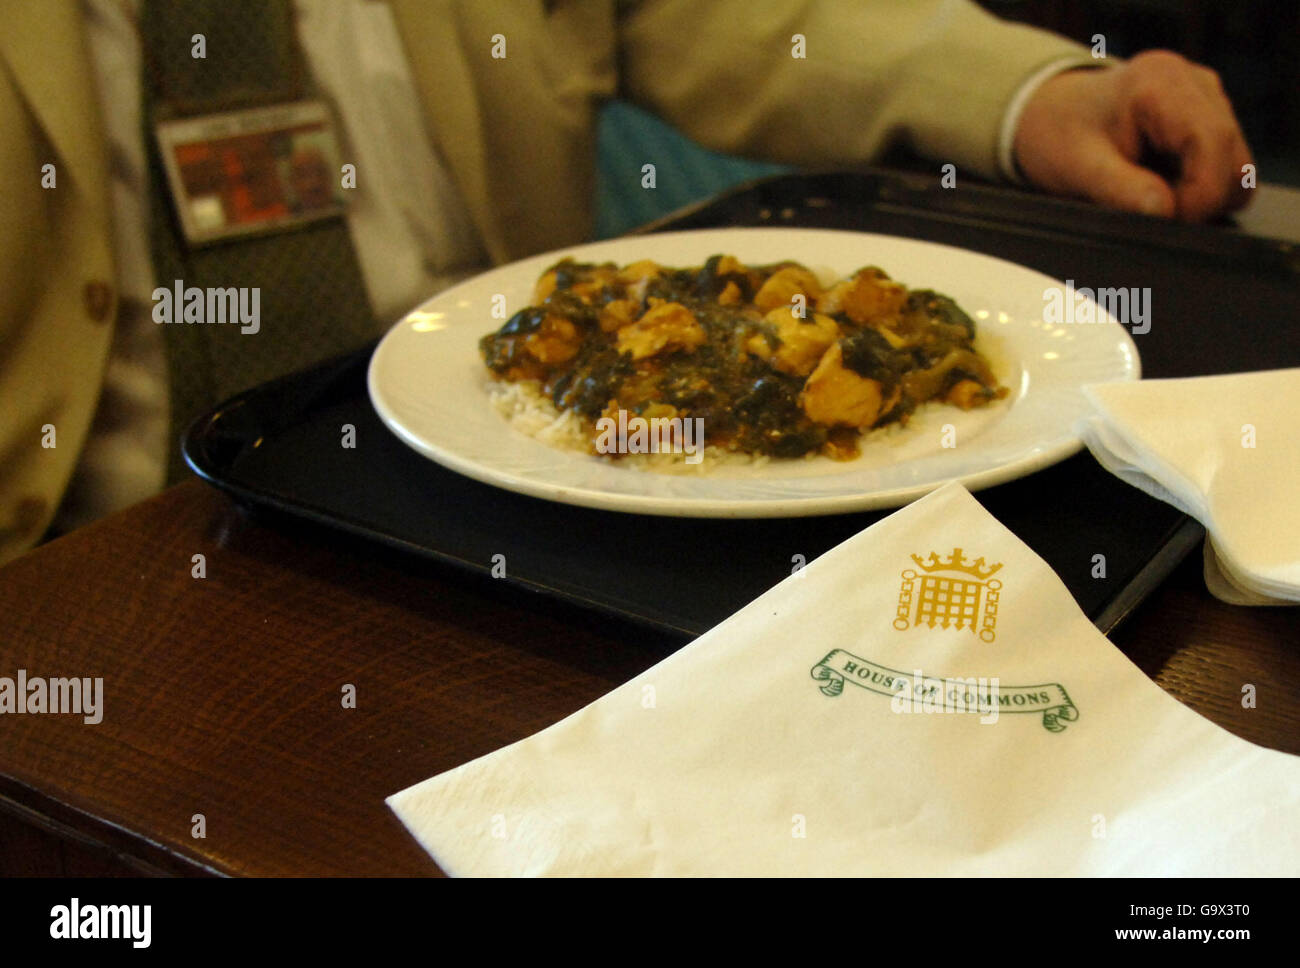 Press Association political correspondent Chris Moncrieff's lunch of 'Chicken Chat' is seen alongside a House of Commons napkin, in the Press cafe, in the Houses of Parliament in Westminster, London. Stock Photo